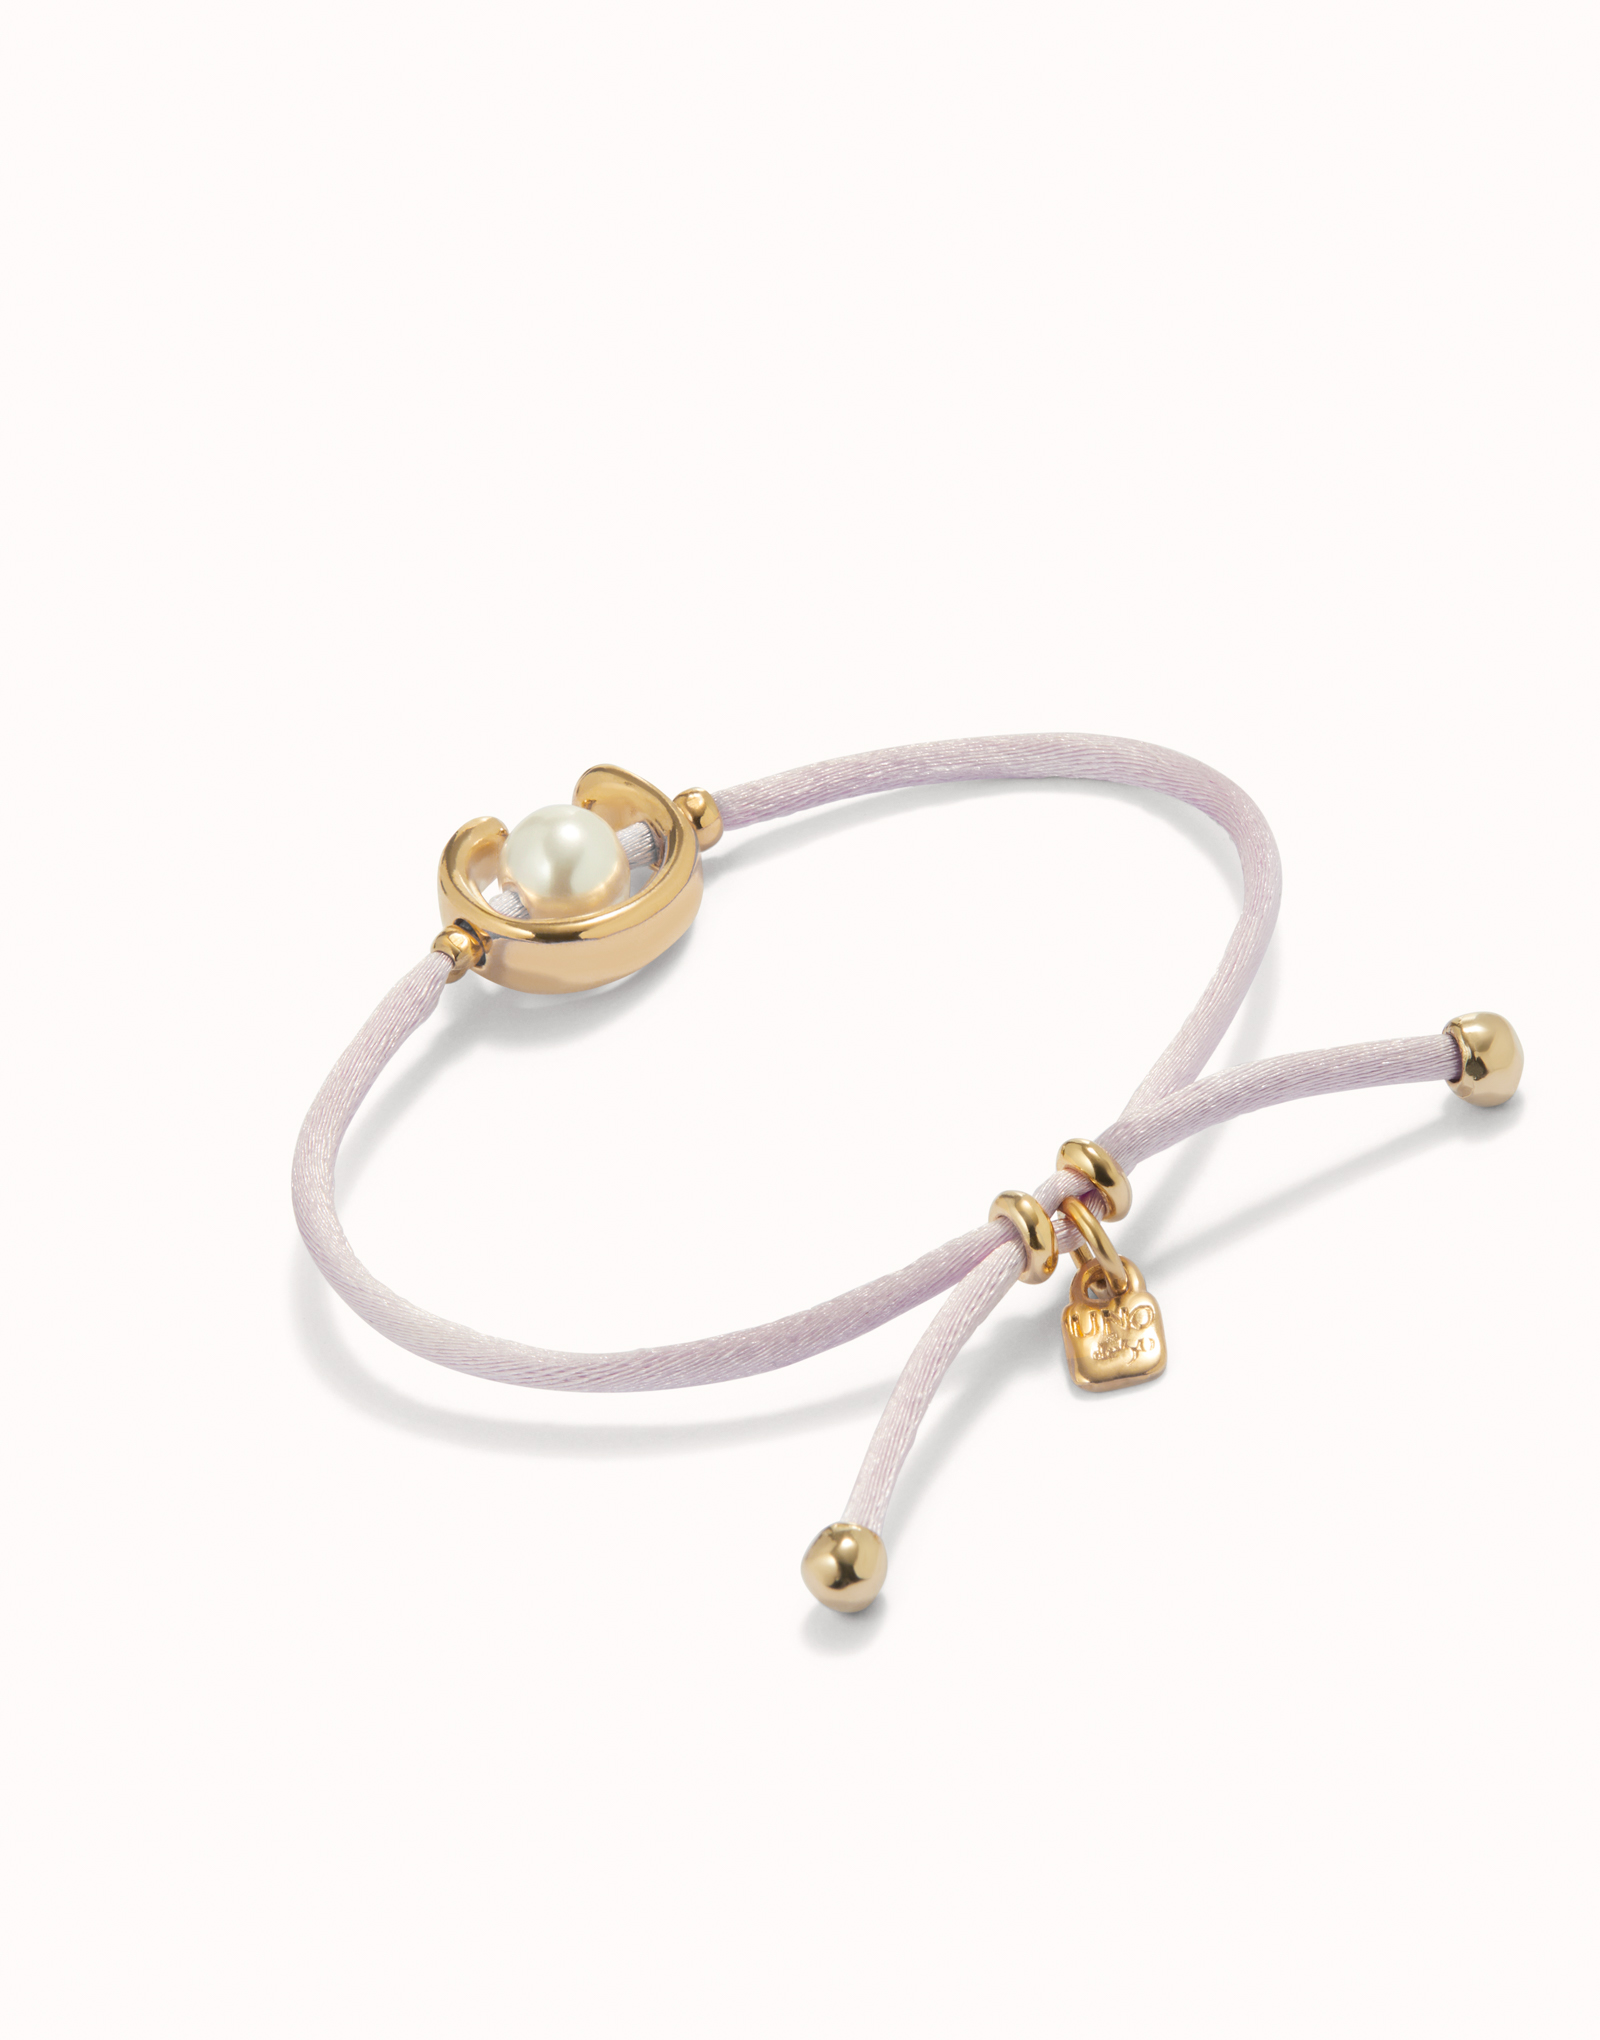 18K gold-plated lilac thread bracelet with shell pearl accessory., Golden, large image number null